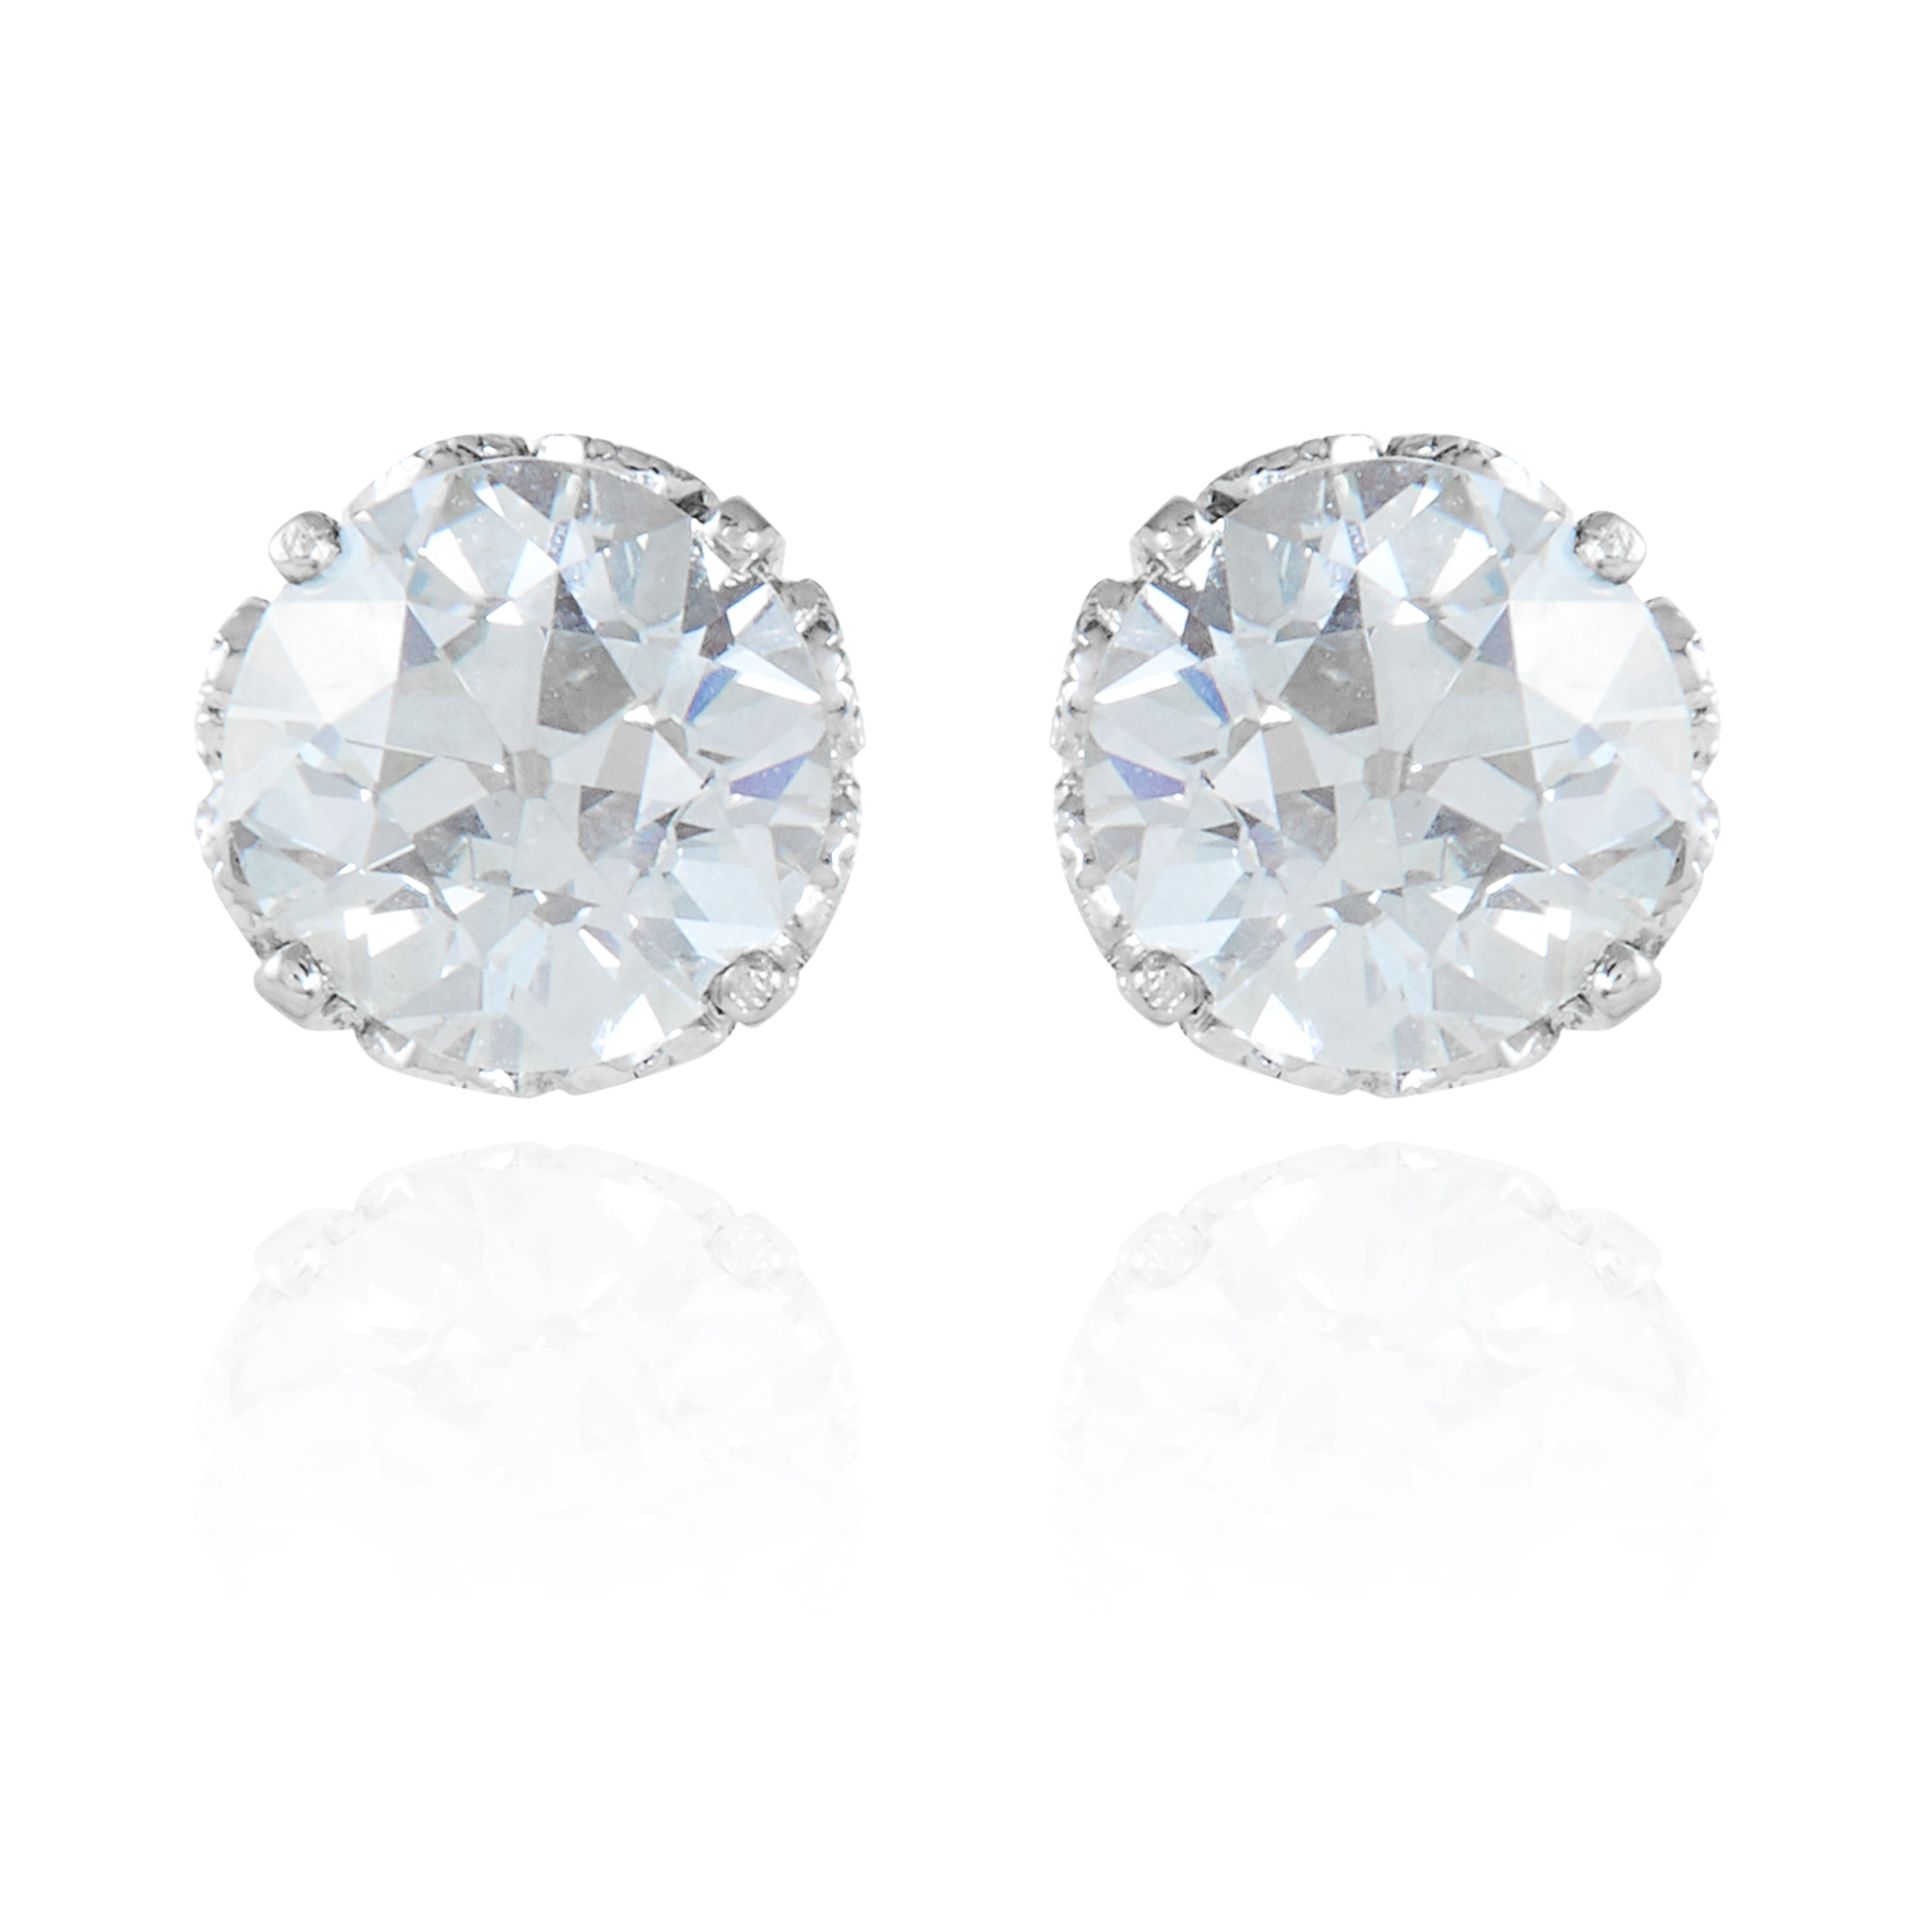 A PAIR OF 1.76 CARAT DIAMOND EAR STUDS in white gold or platinum, set with round cut diamonds